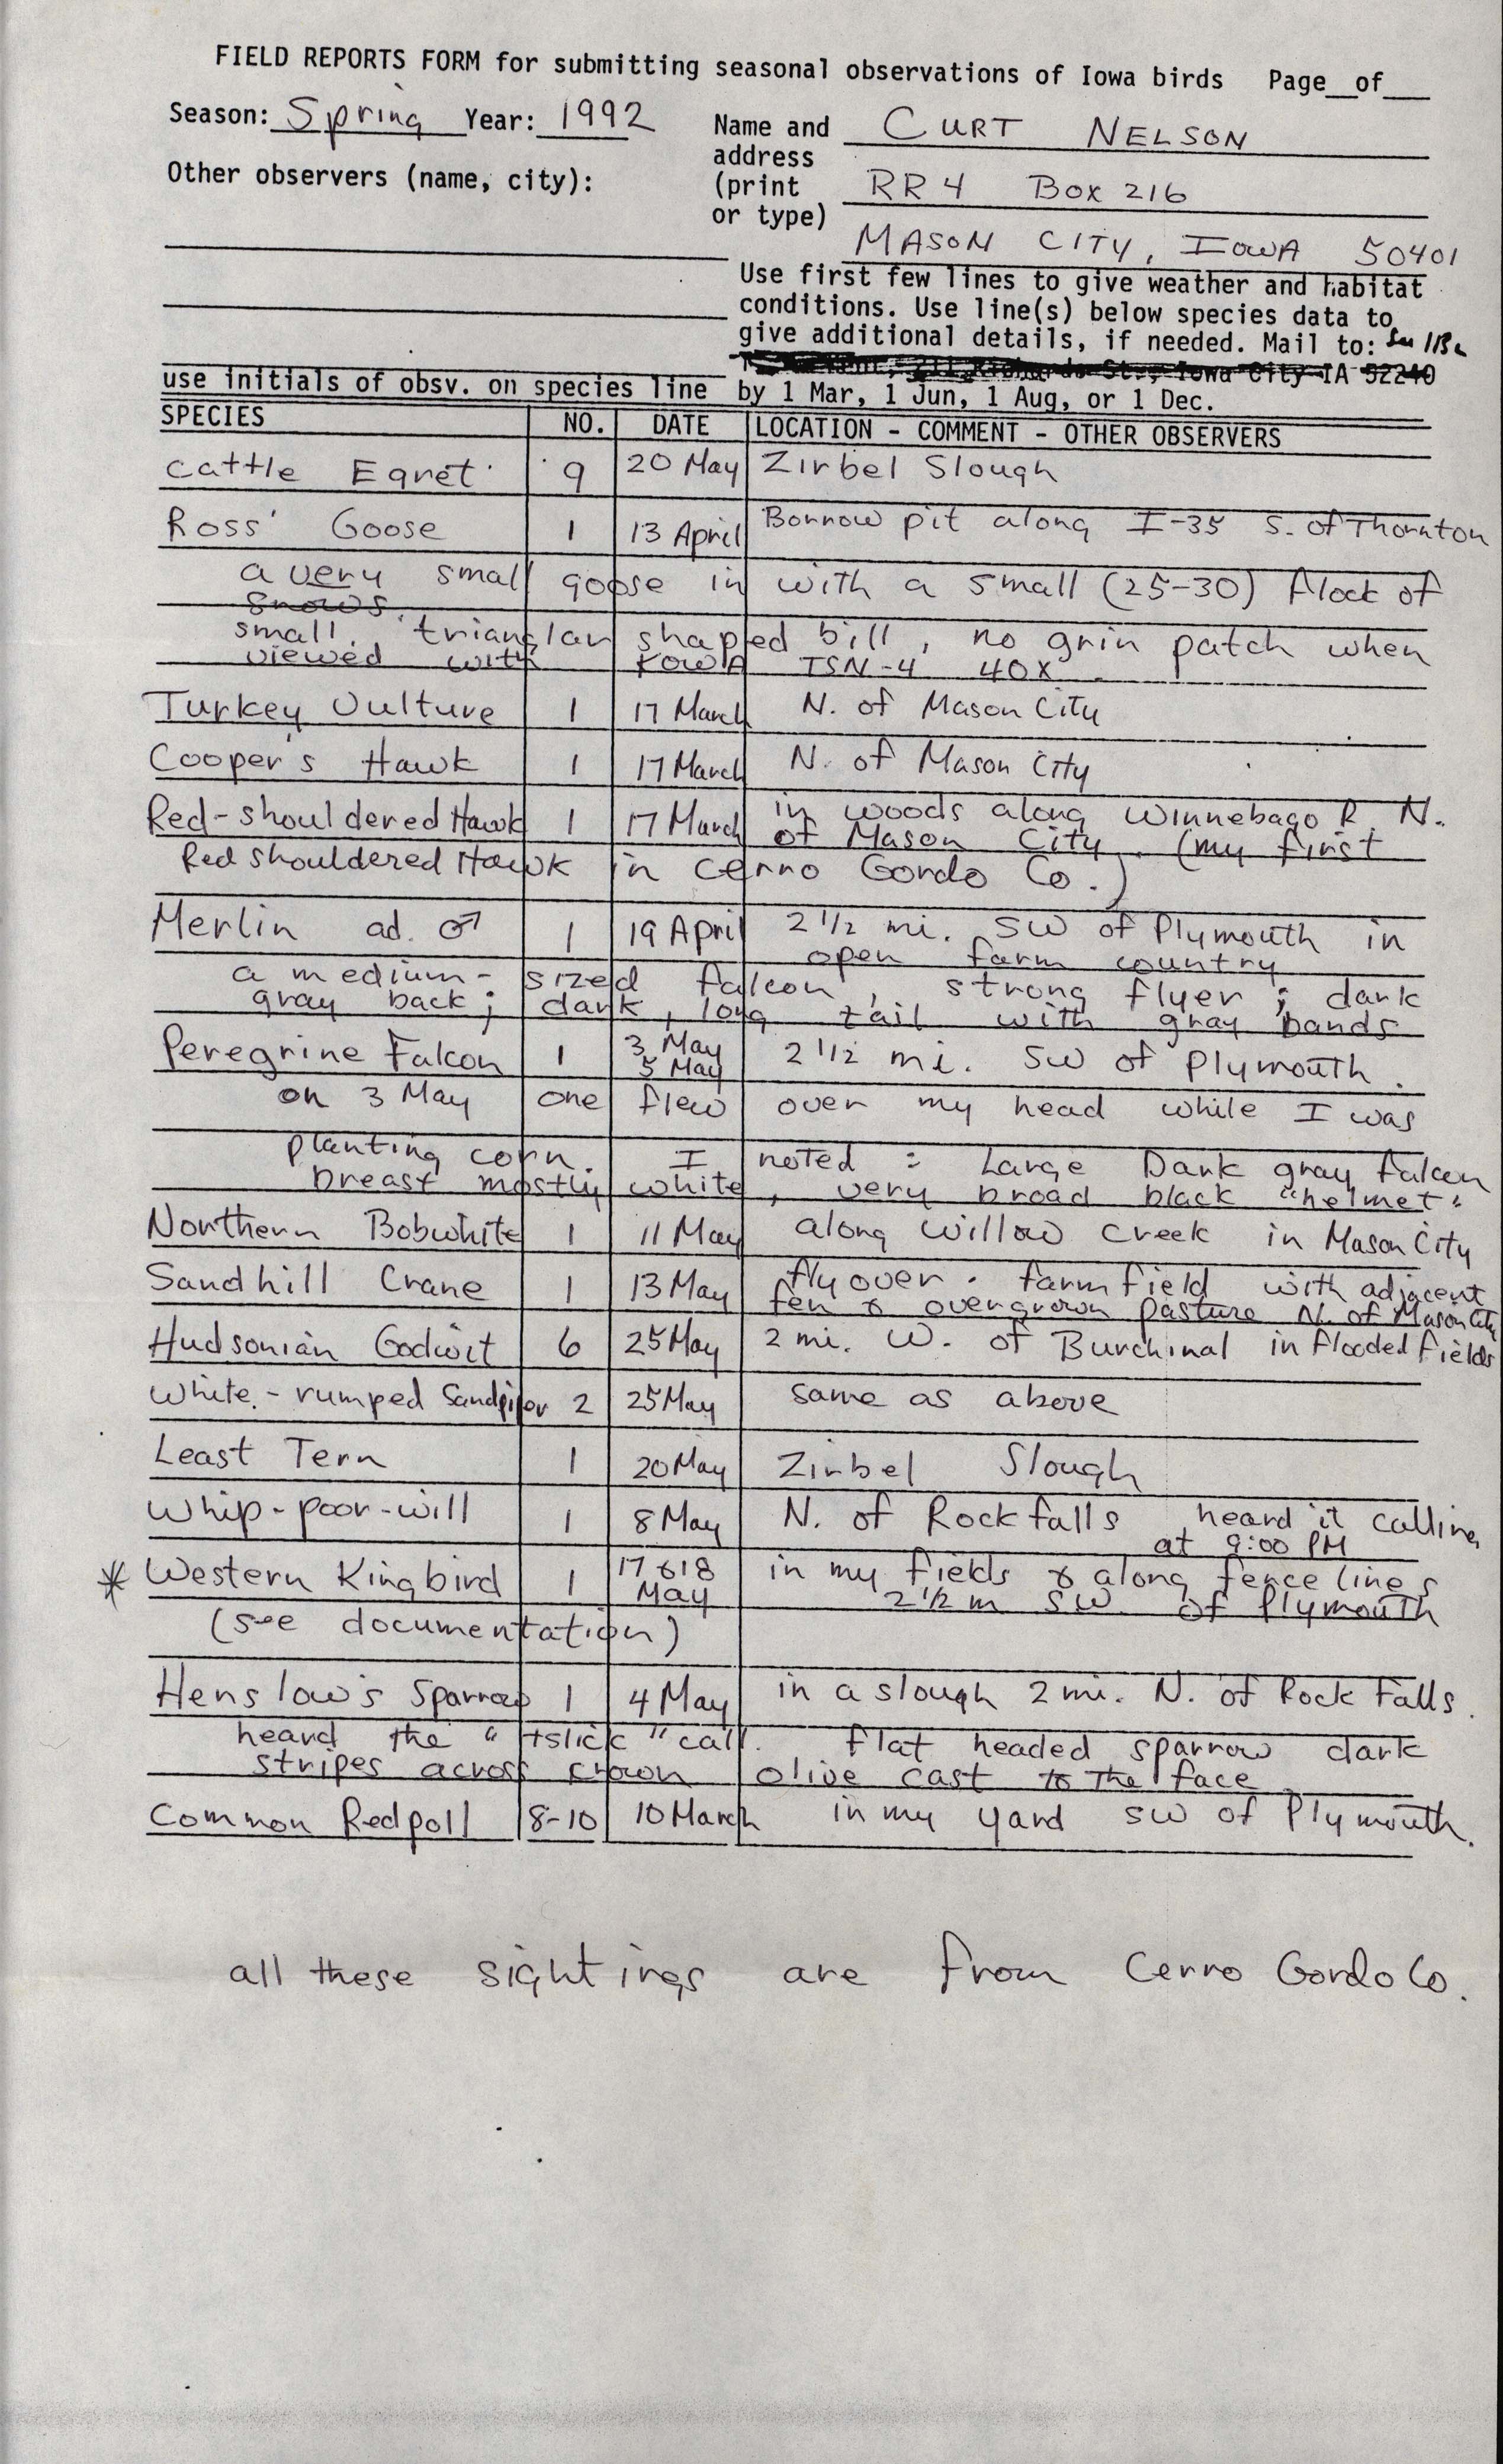 Field reports form for submitting seasonal observations of Iowa birds, Curtis Nelson, spring 1992